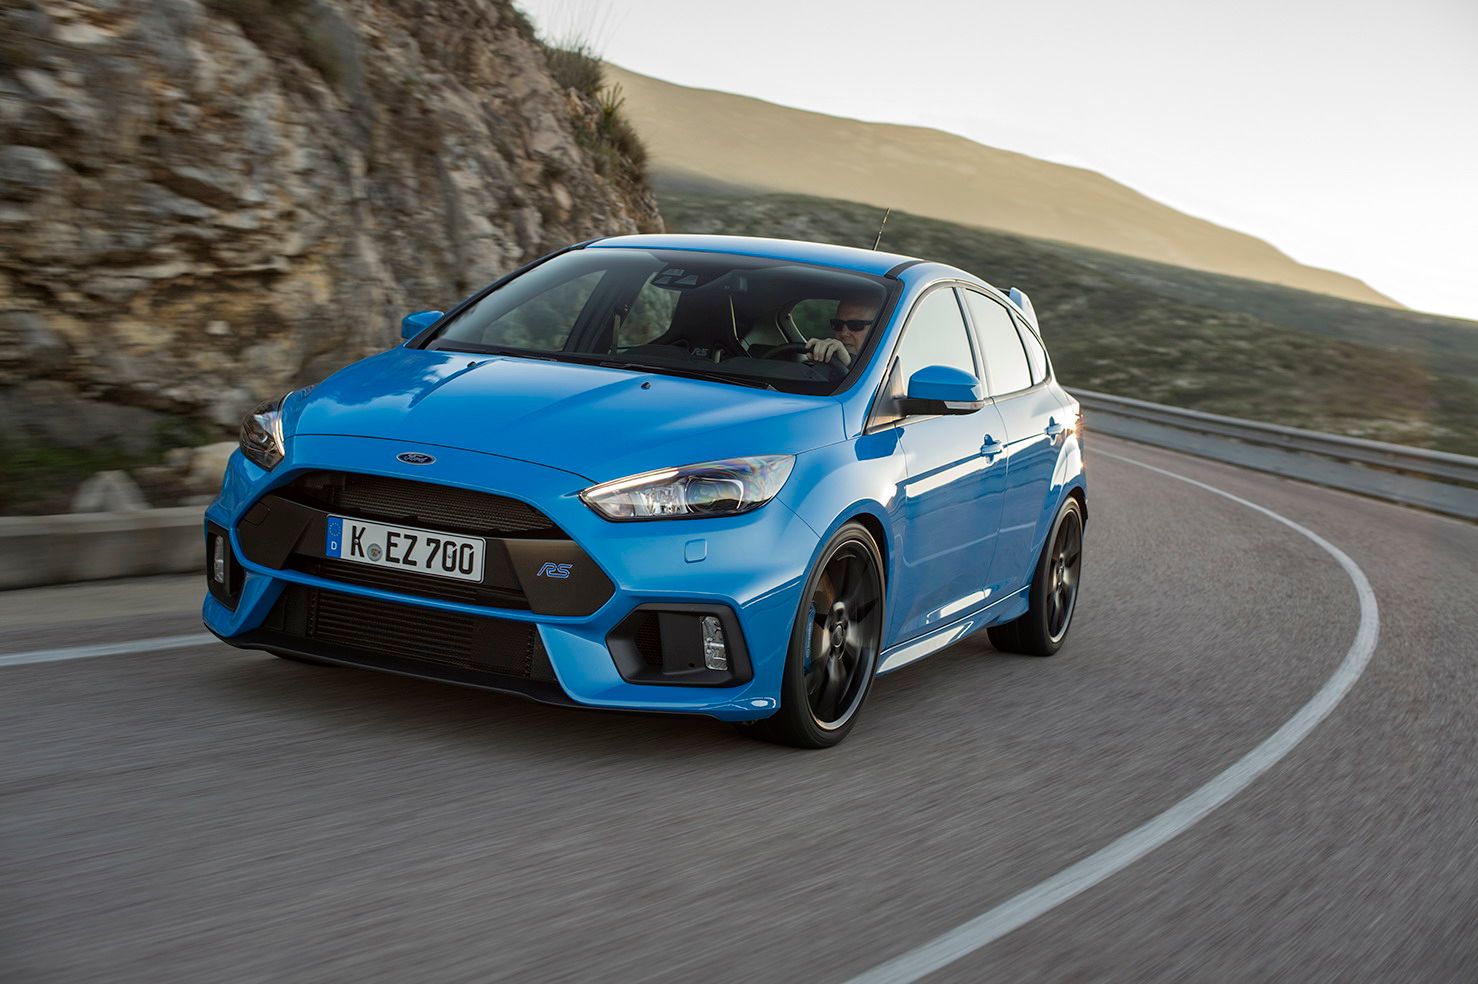 2018 The Next-Gen Focus RS Could Stick it to Mercedes-AMG and Audi with a 400-Horsepower Hybrid Drivetrain